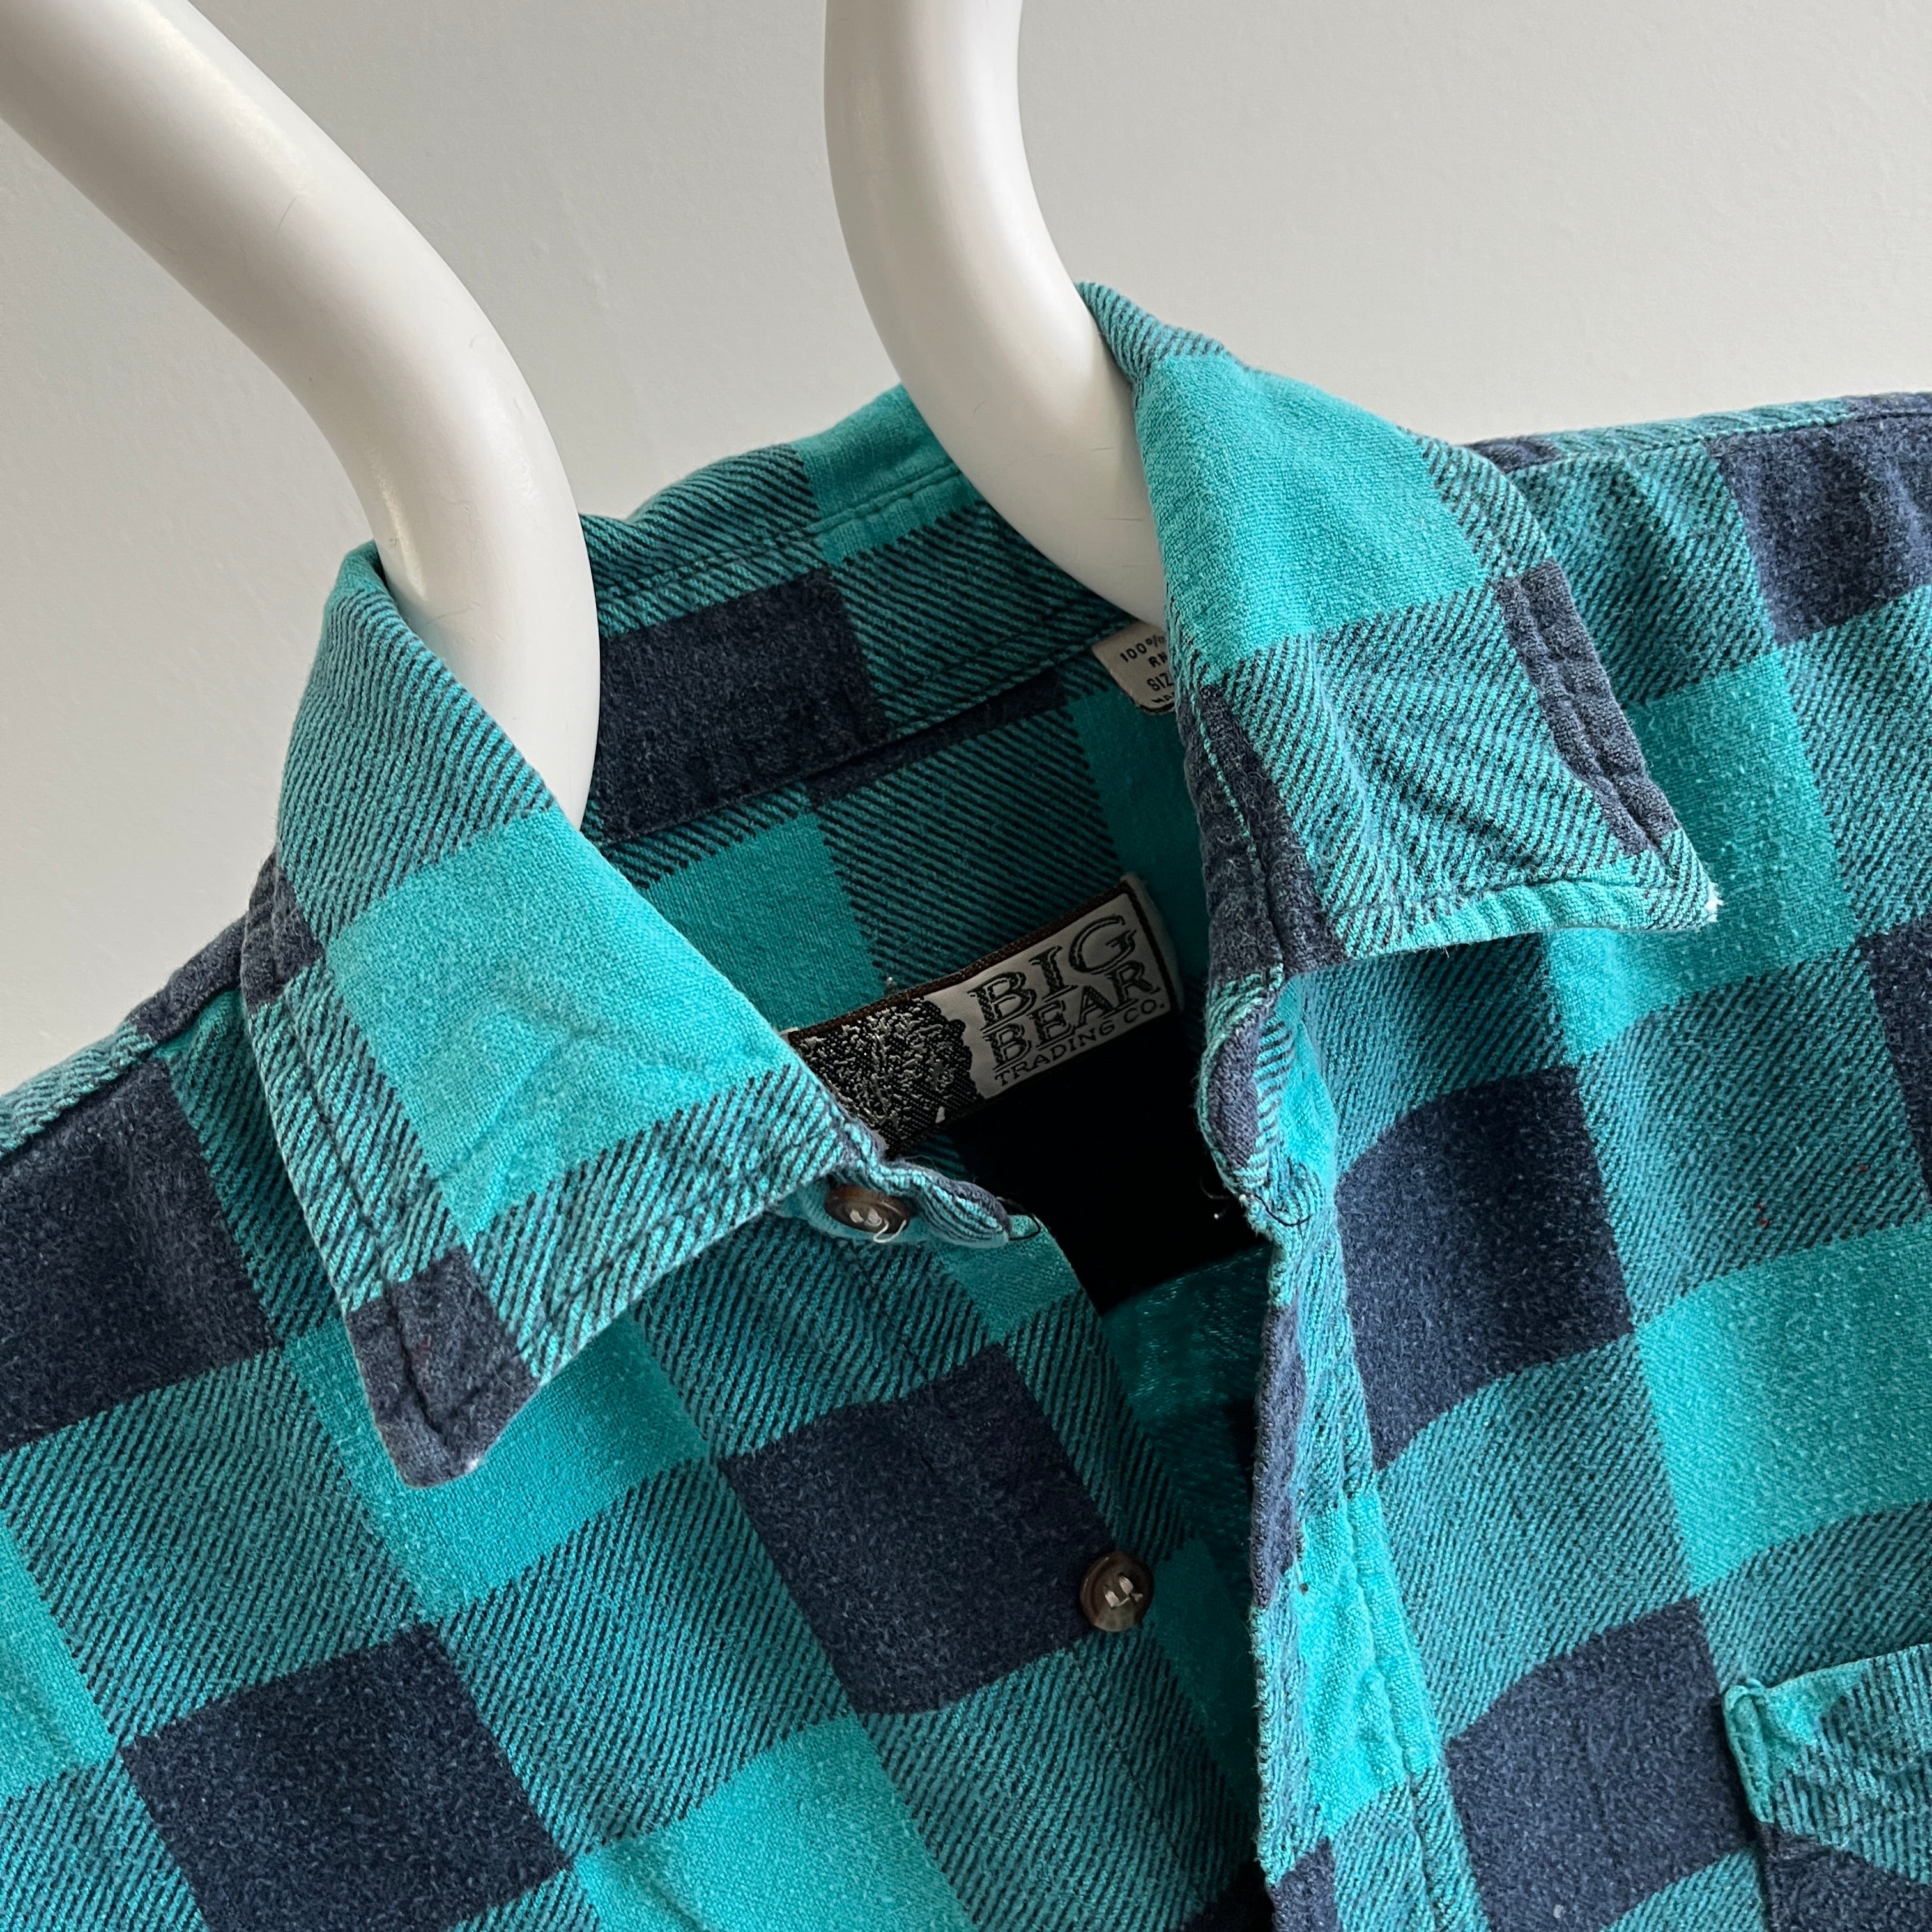 1990/2000s Teal Buffalo Plaid Paint Stained Cotton Flannel